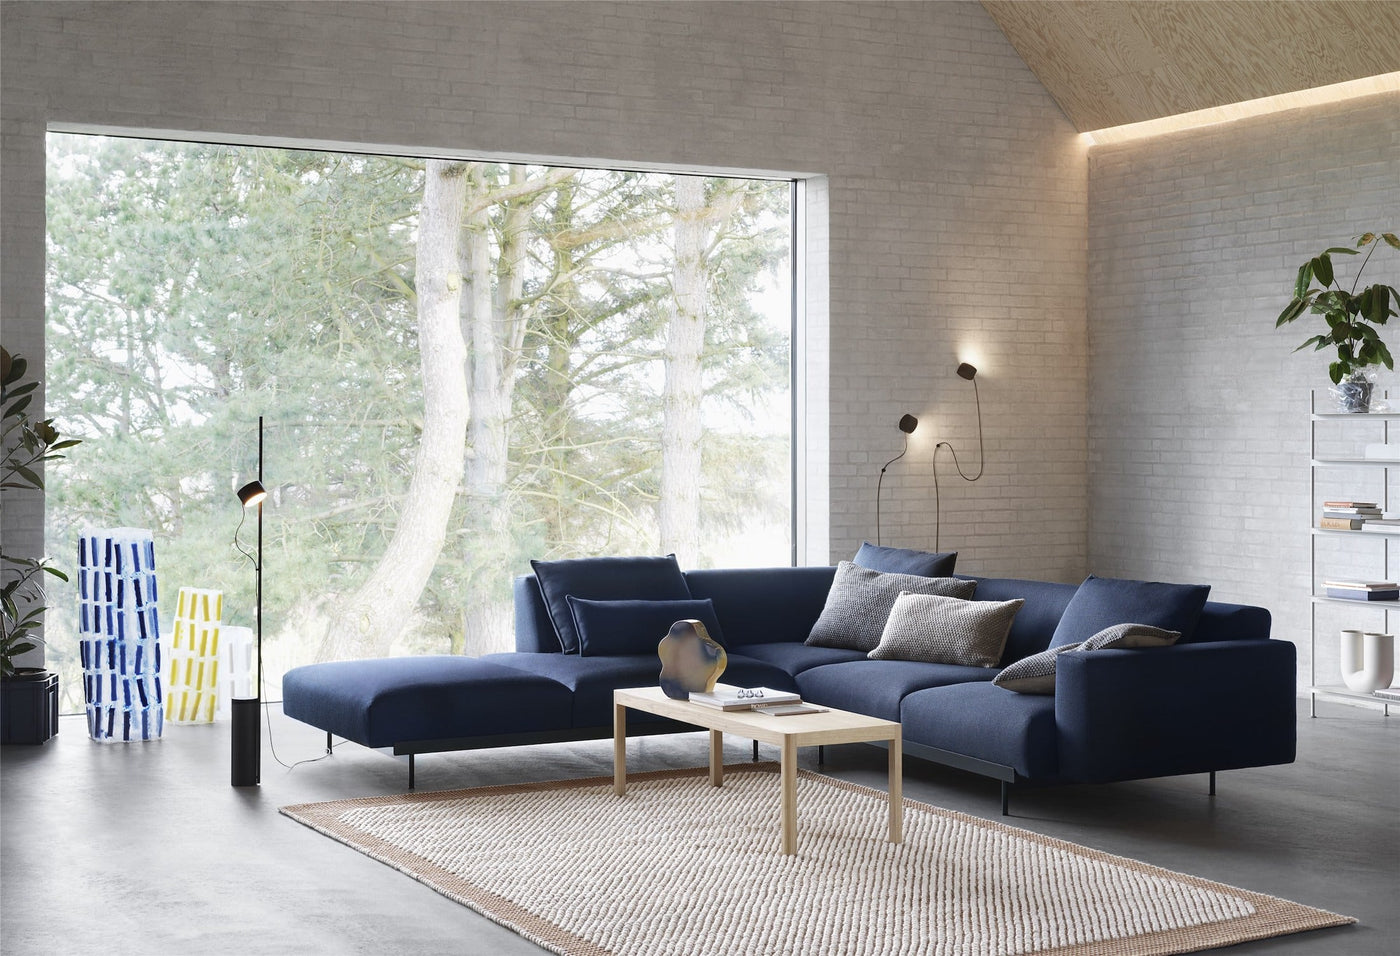 Muuto In Situ modular sofa system. Made to order from someday designs